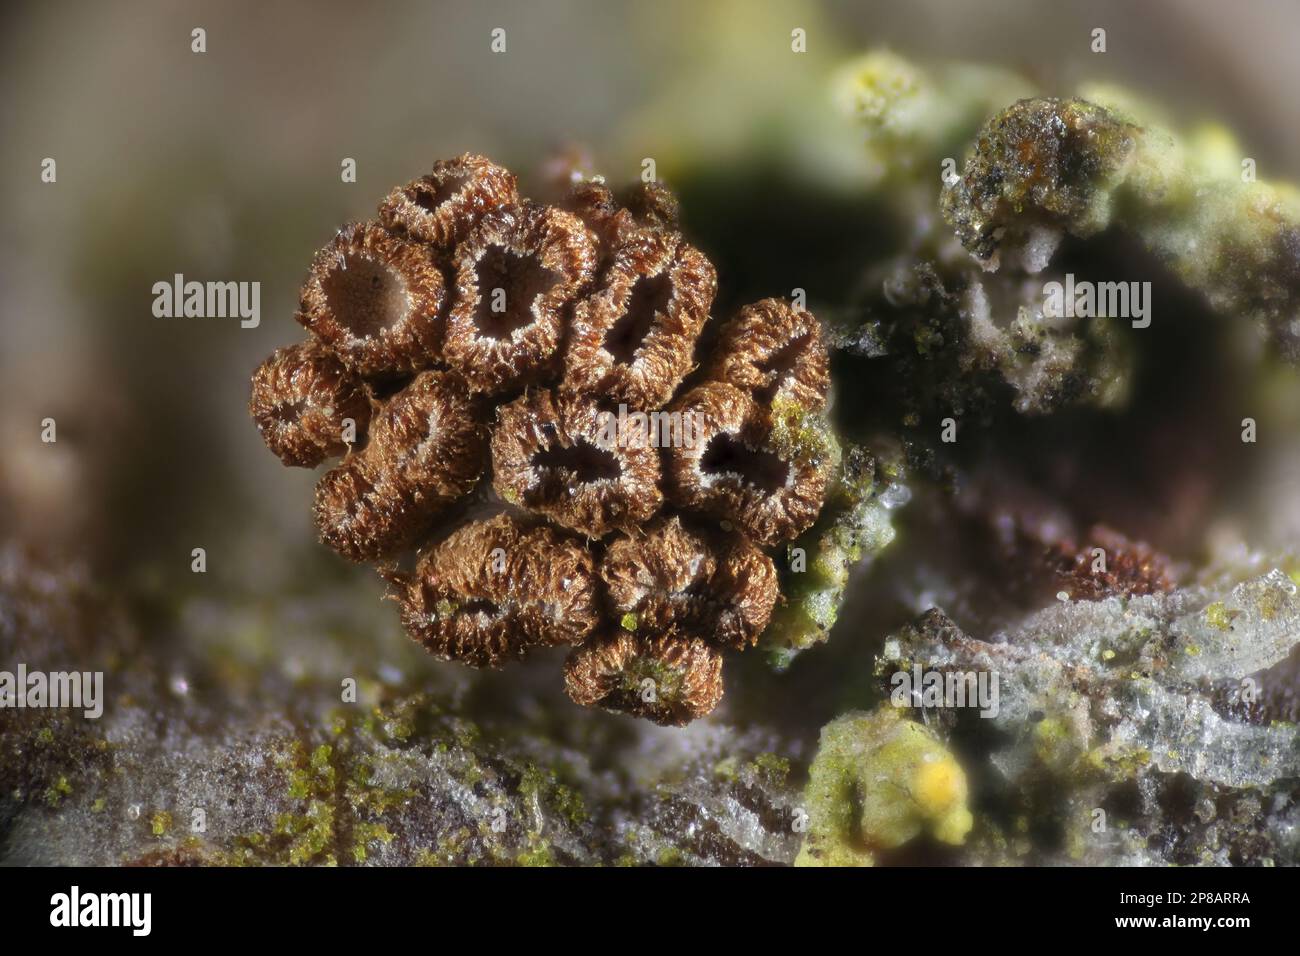 Merismodes fasciculata, known as crowded cuplet, microscope image Stock Photo